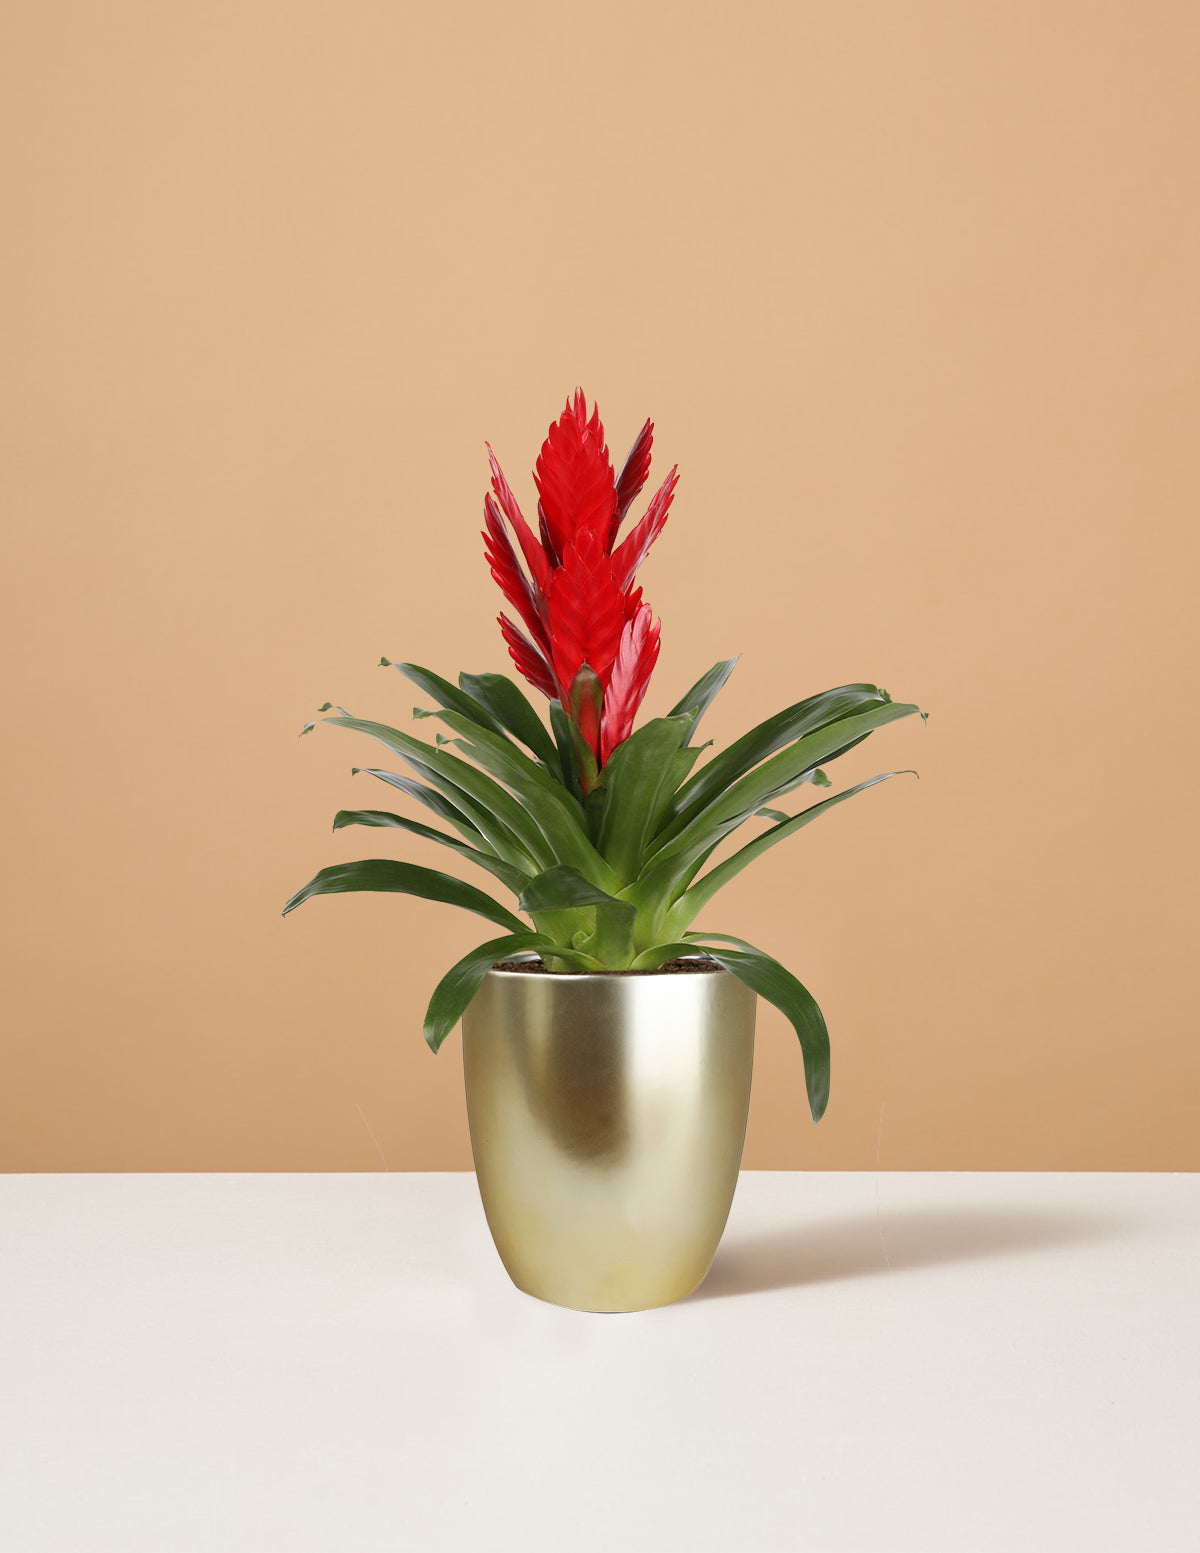 Bromeliad Vriesea Intenso The Flowering Delivery Sill | Red Houseplants for 